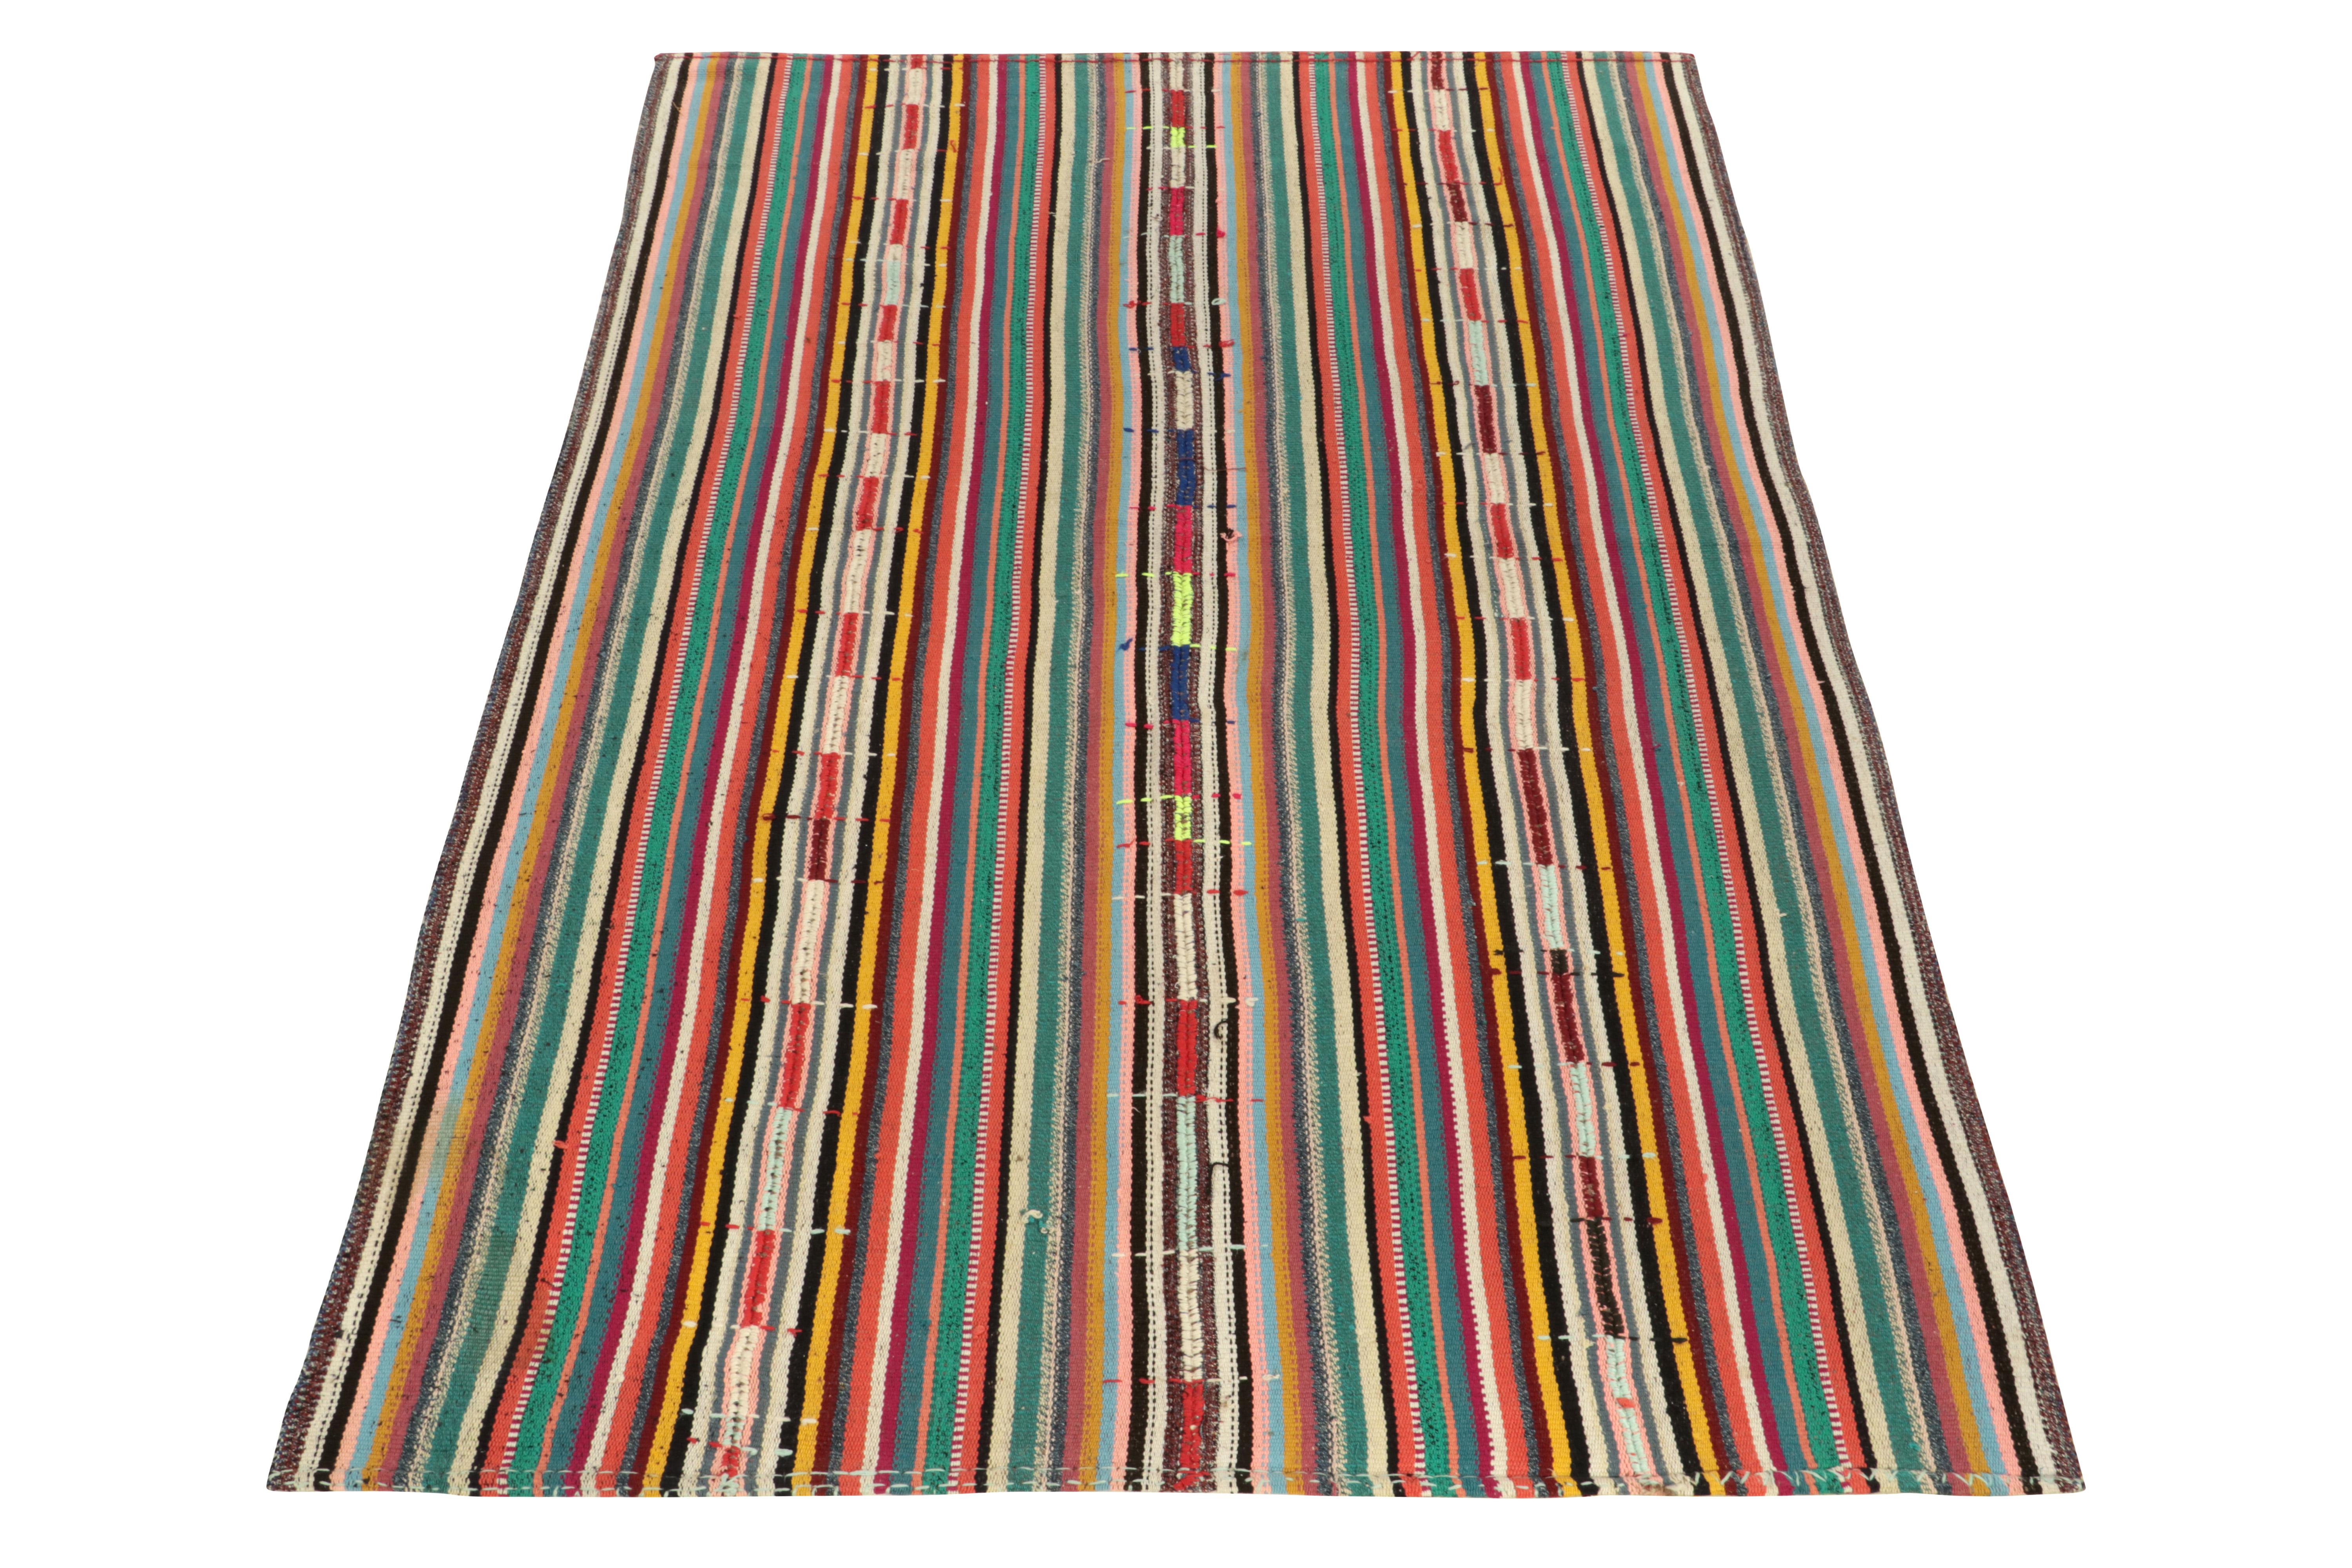 Originating from Turkey circa 1950-1960, a rare type of chaput kilim rug style now entering our Antique & Vintage selections. 

Characterized by fine detailing with the colors within the polychromatic stripes, the light & refreshing piece welcomes